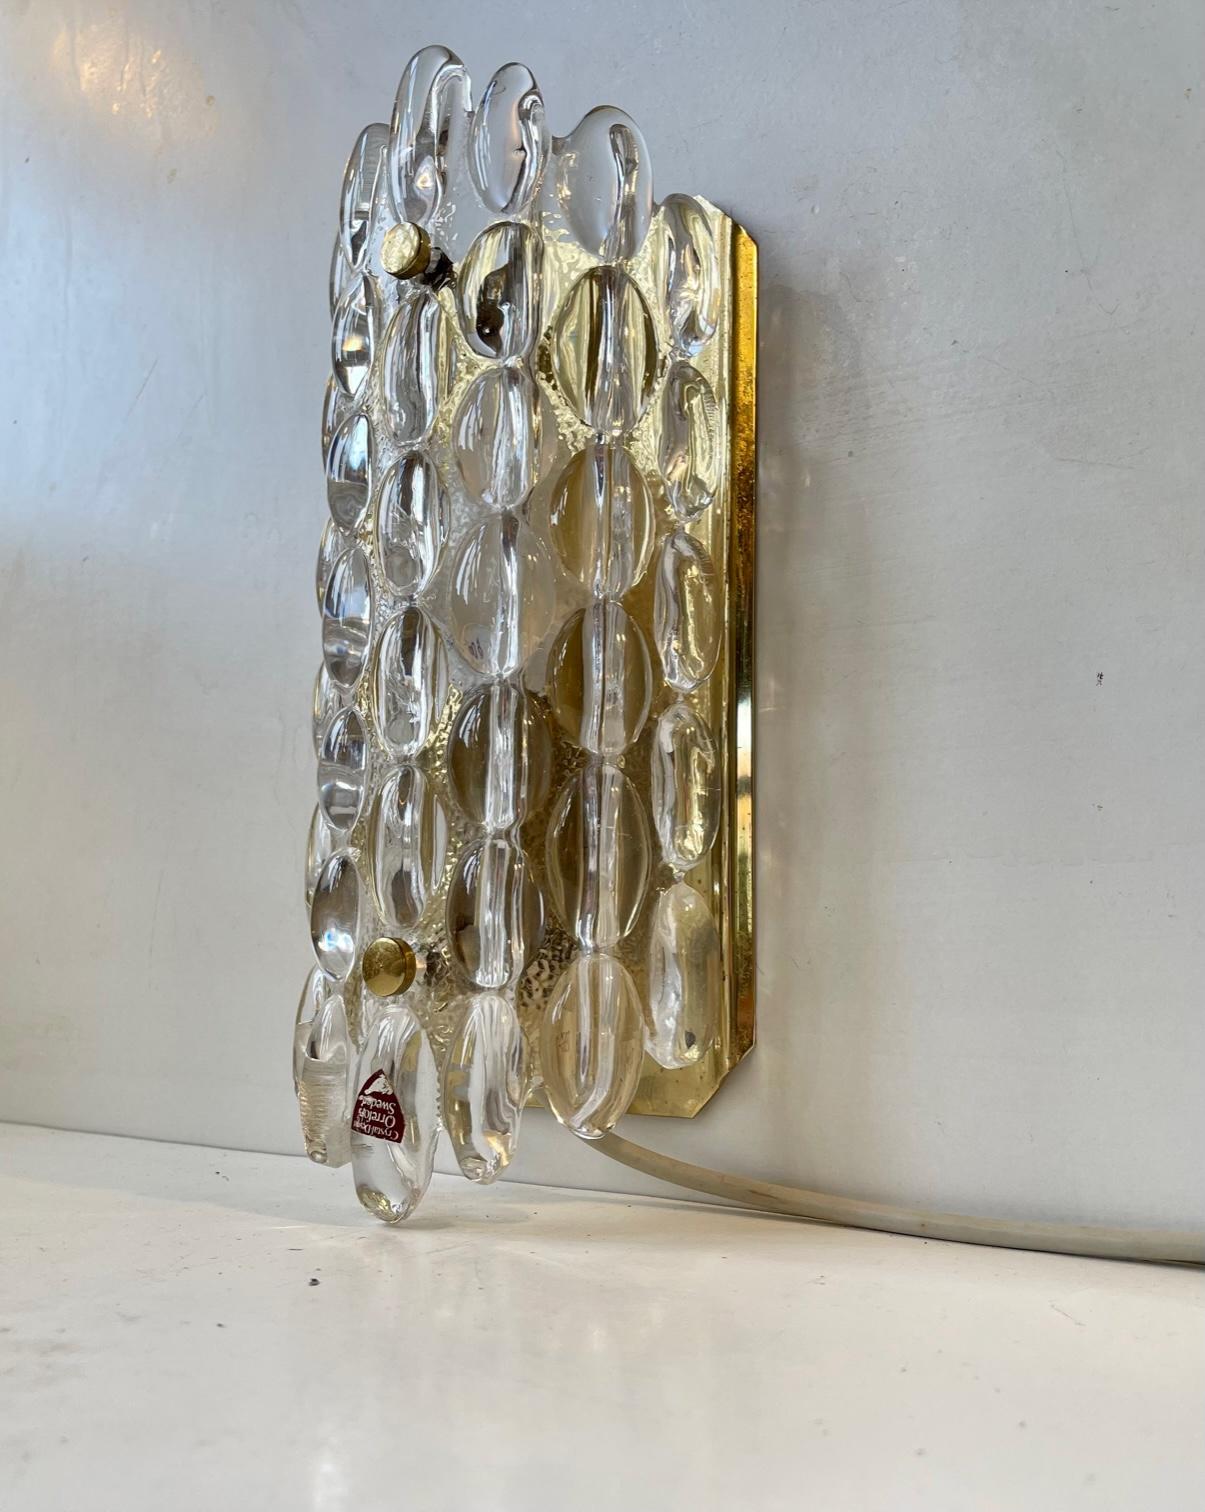 A rare crystal and gilded brass wall light designed by Carl Fagerlund and manufactured by Orrefors in Sweden during the 1950s-60s. The connected crystal drops creates a cosy, ambient and soft lighting. Measurements: H: 30 cm, W: 13 cm, Dept: 8 cm.